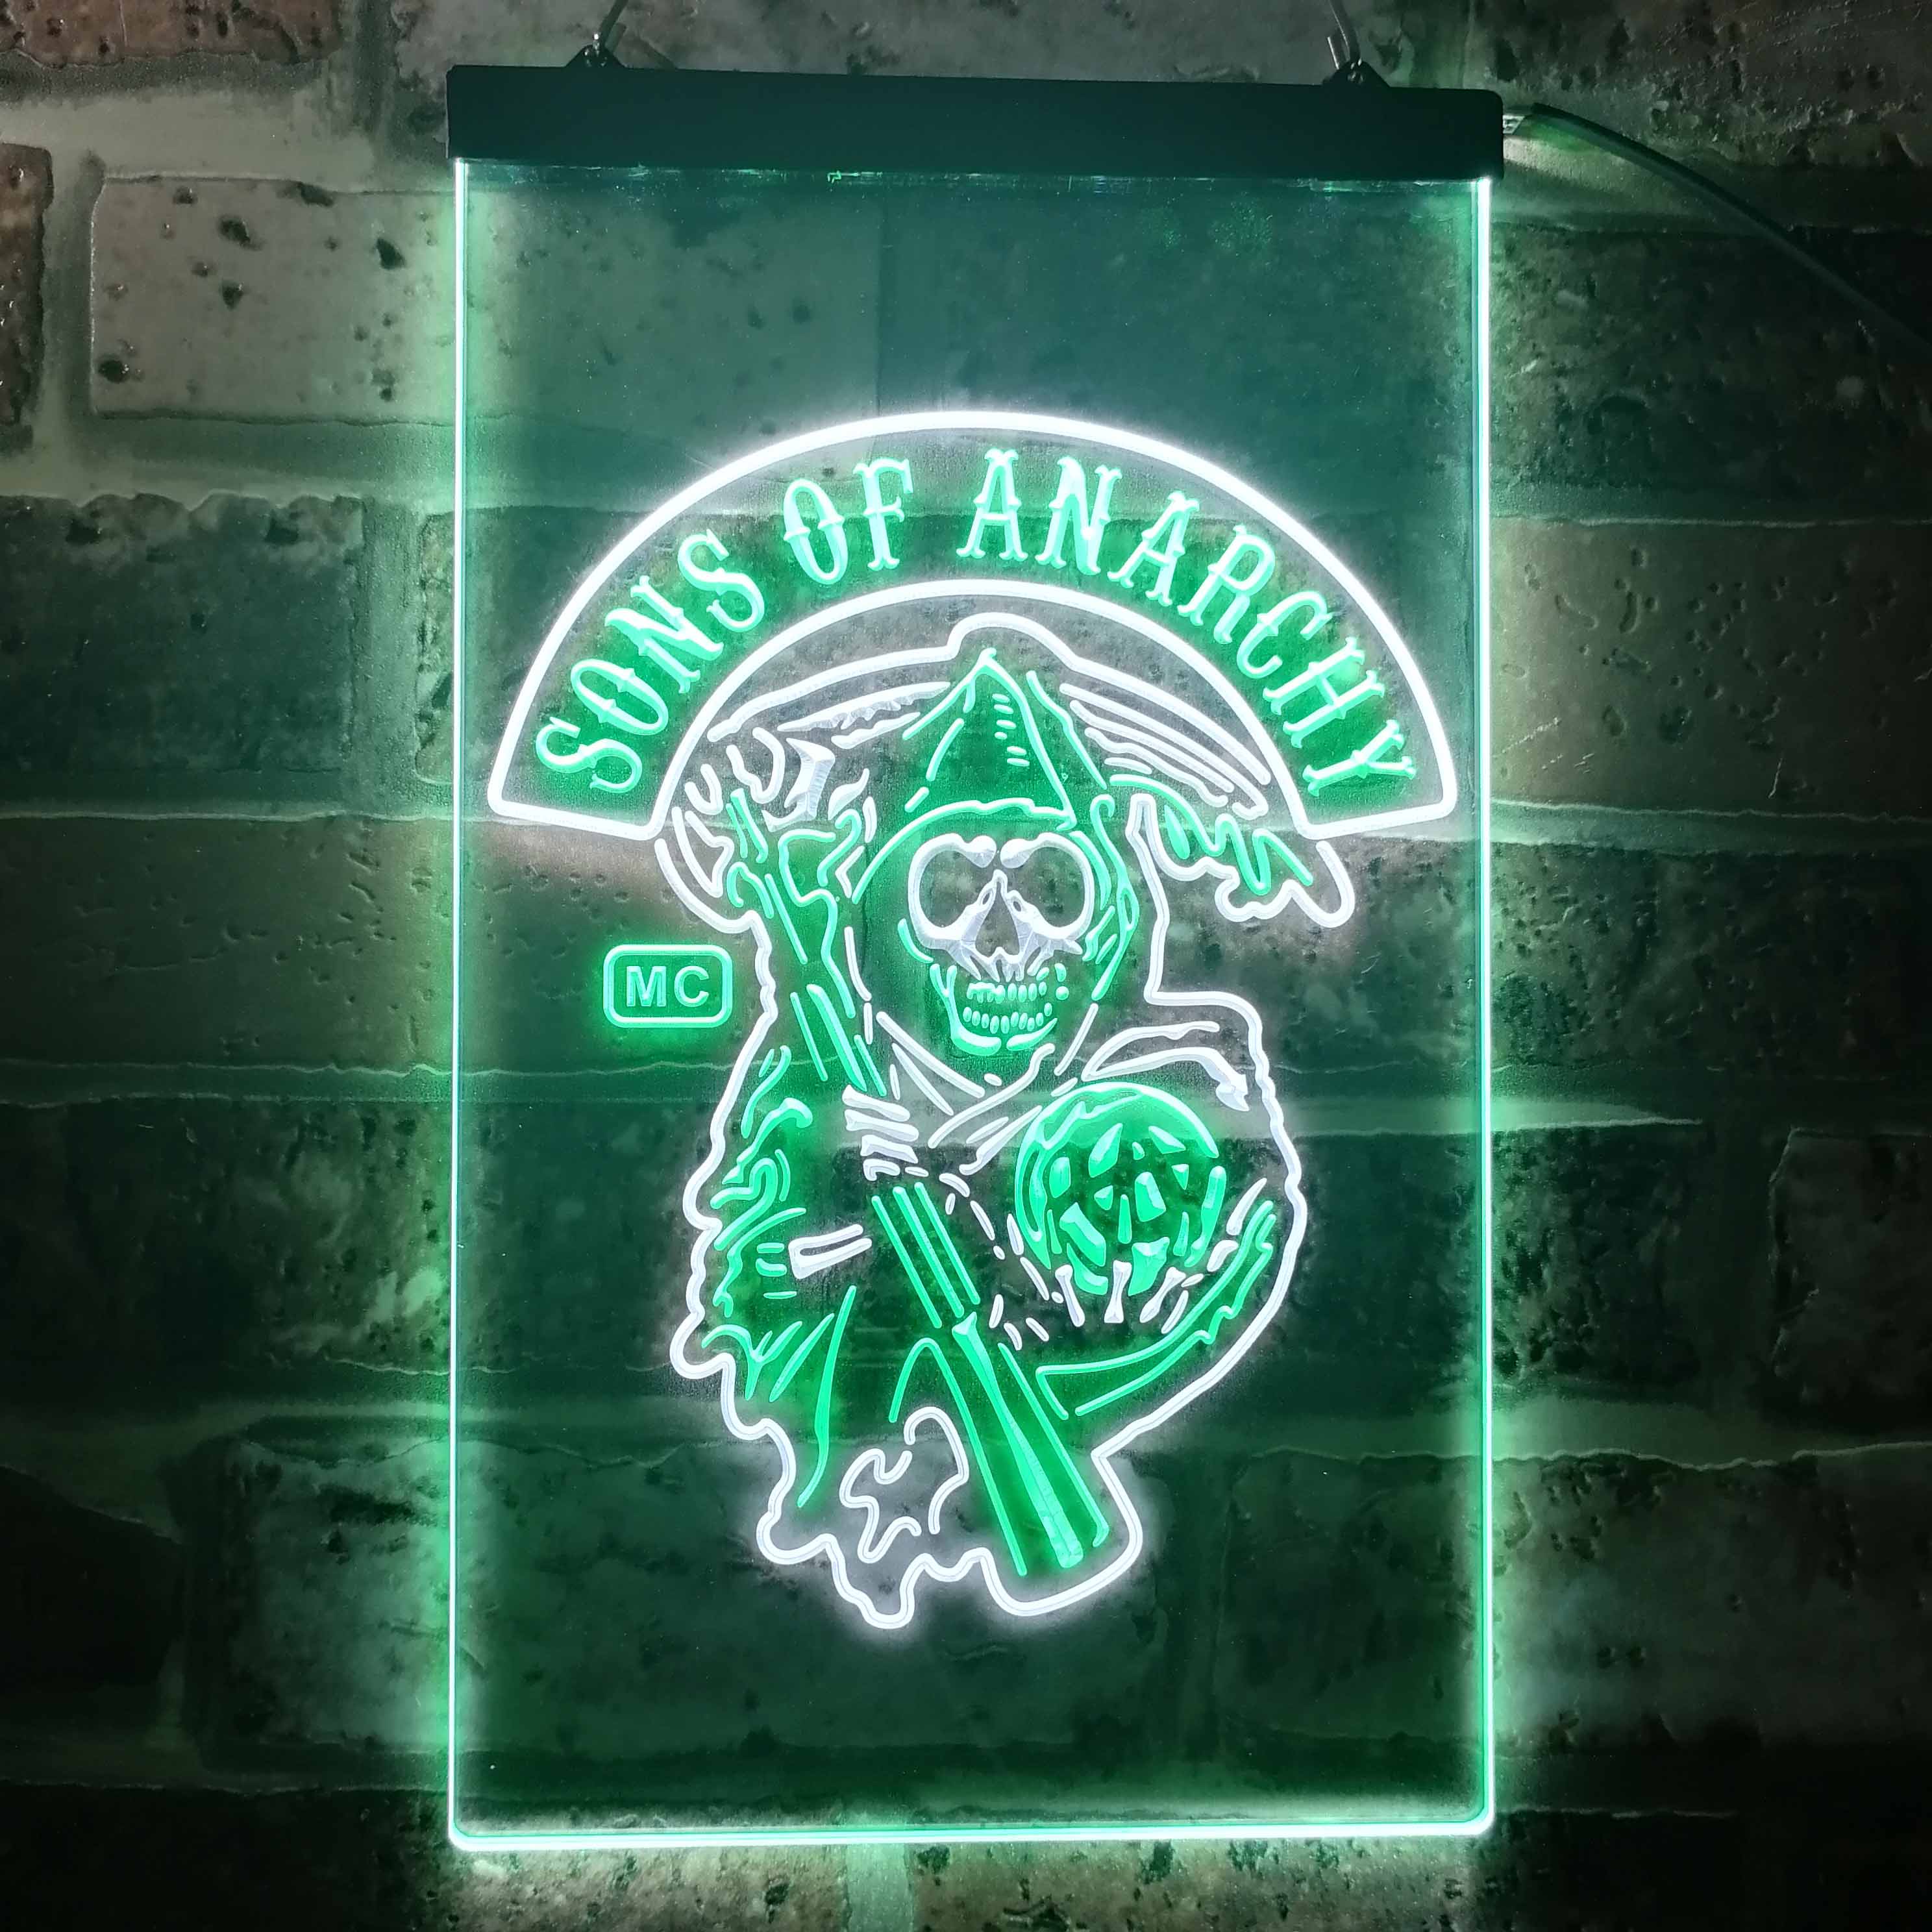 Sons of Anarchy Neon-Like LED Sign